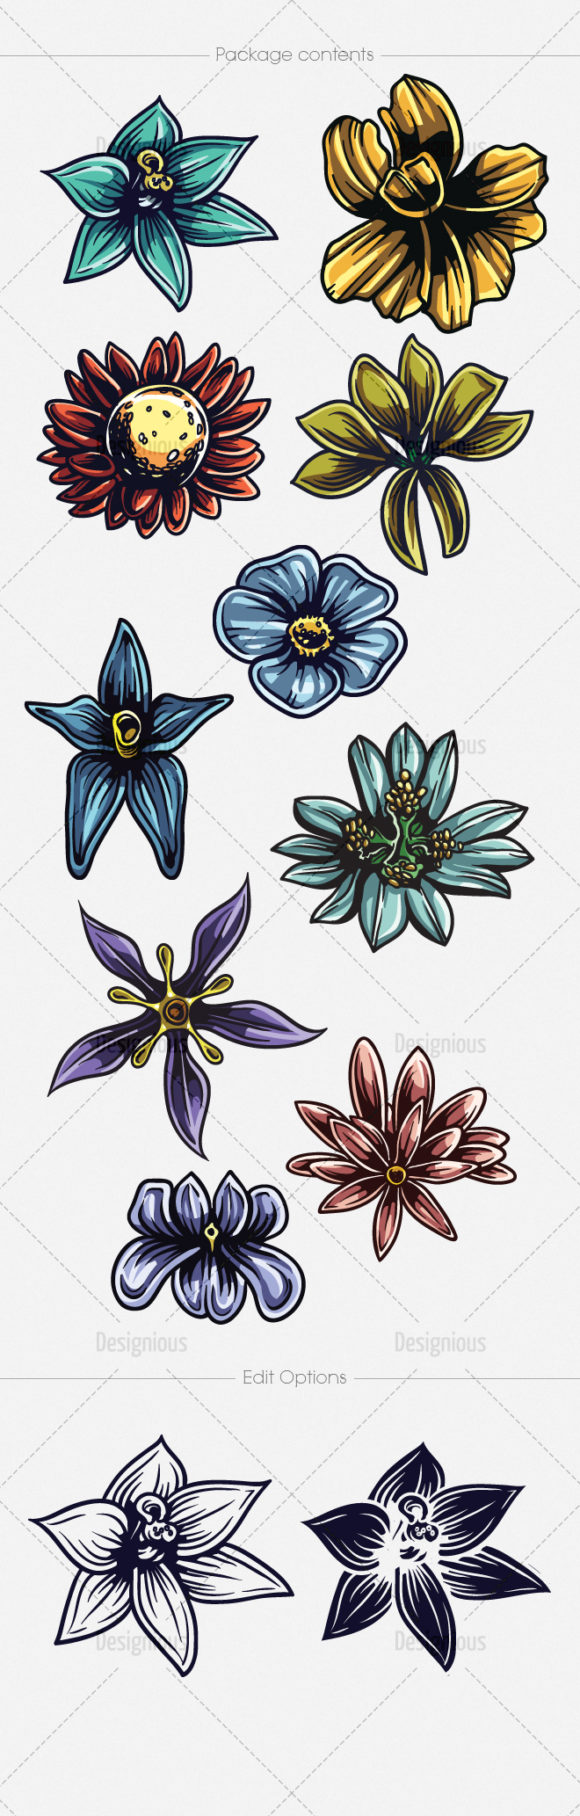 Floral Vector Pack 138 2